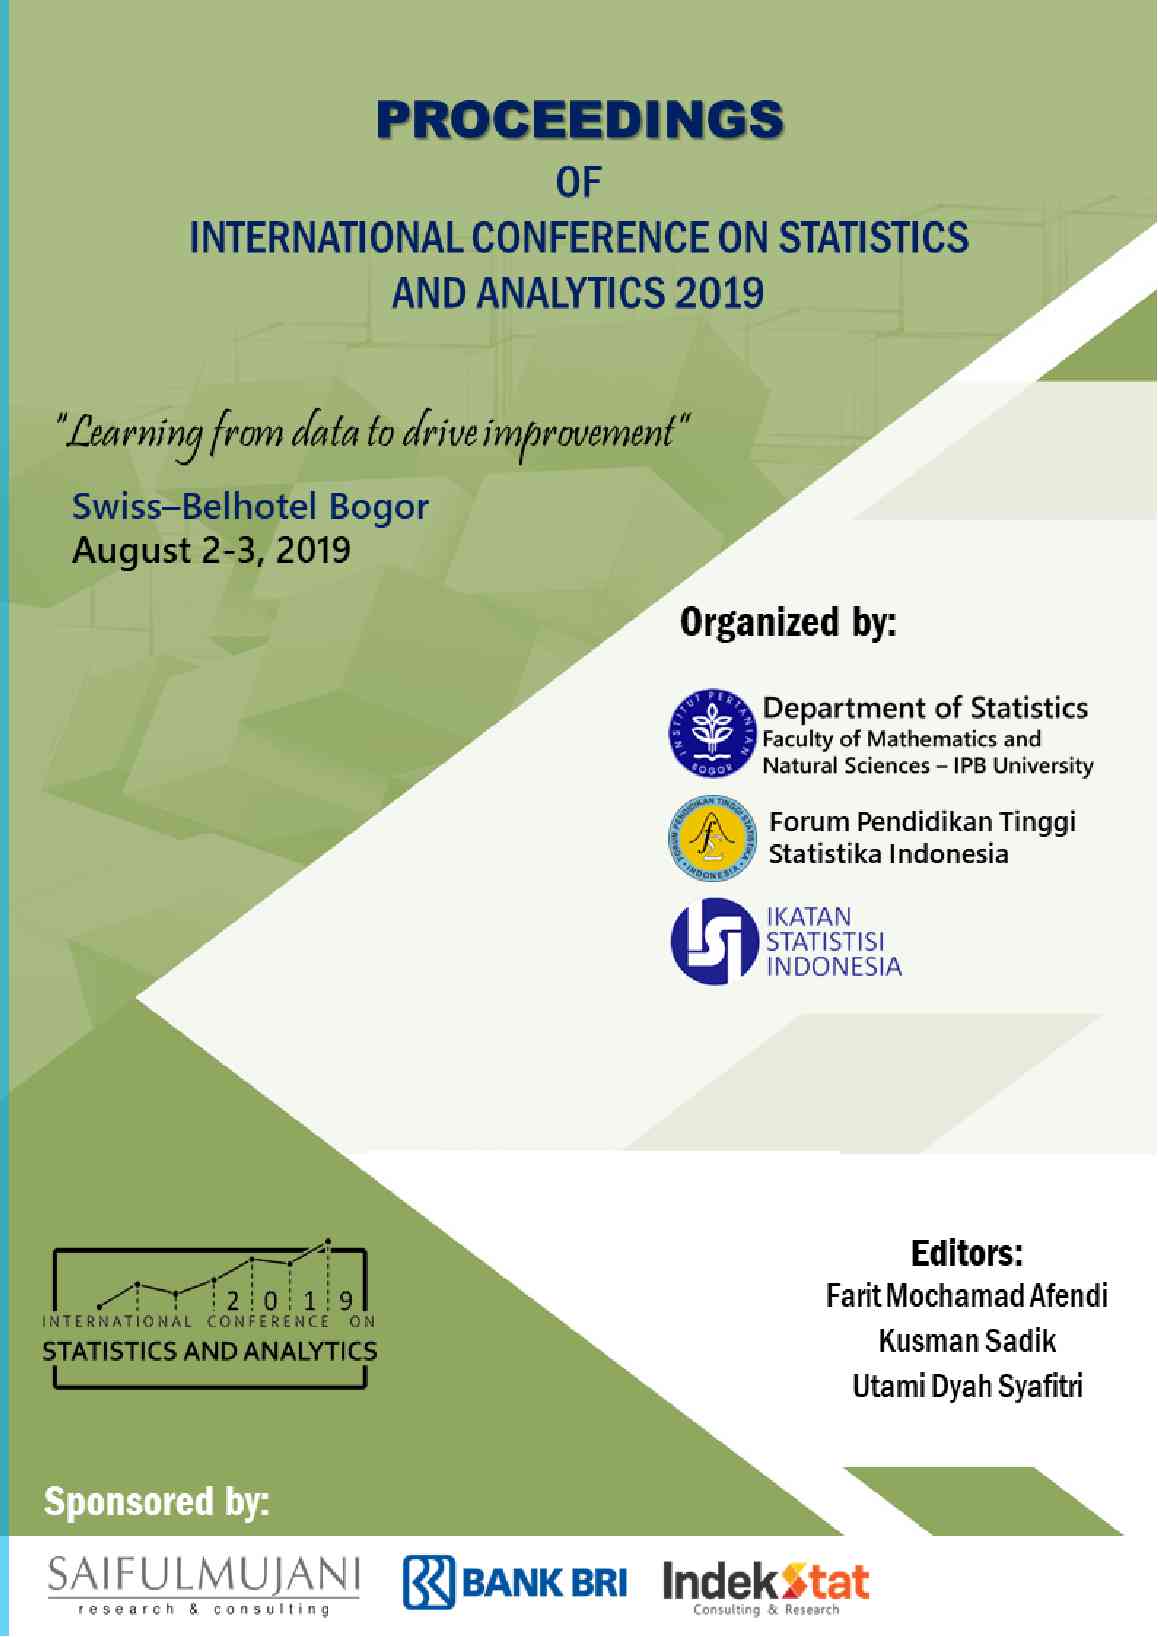 					View Proceeding of International Conference on Statistics and Analytics - 2019
				